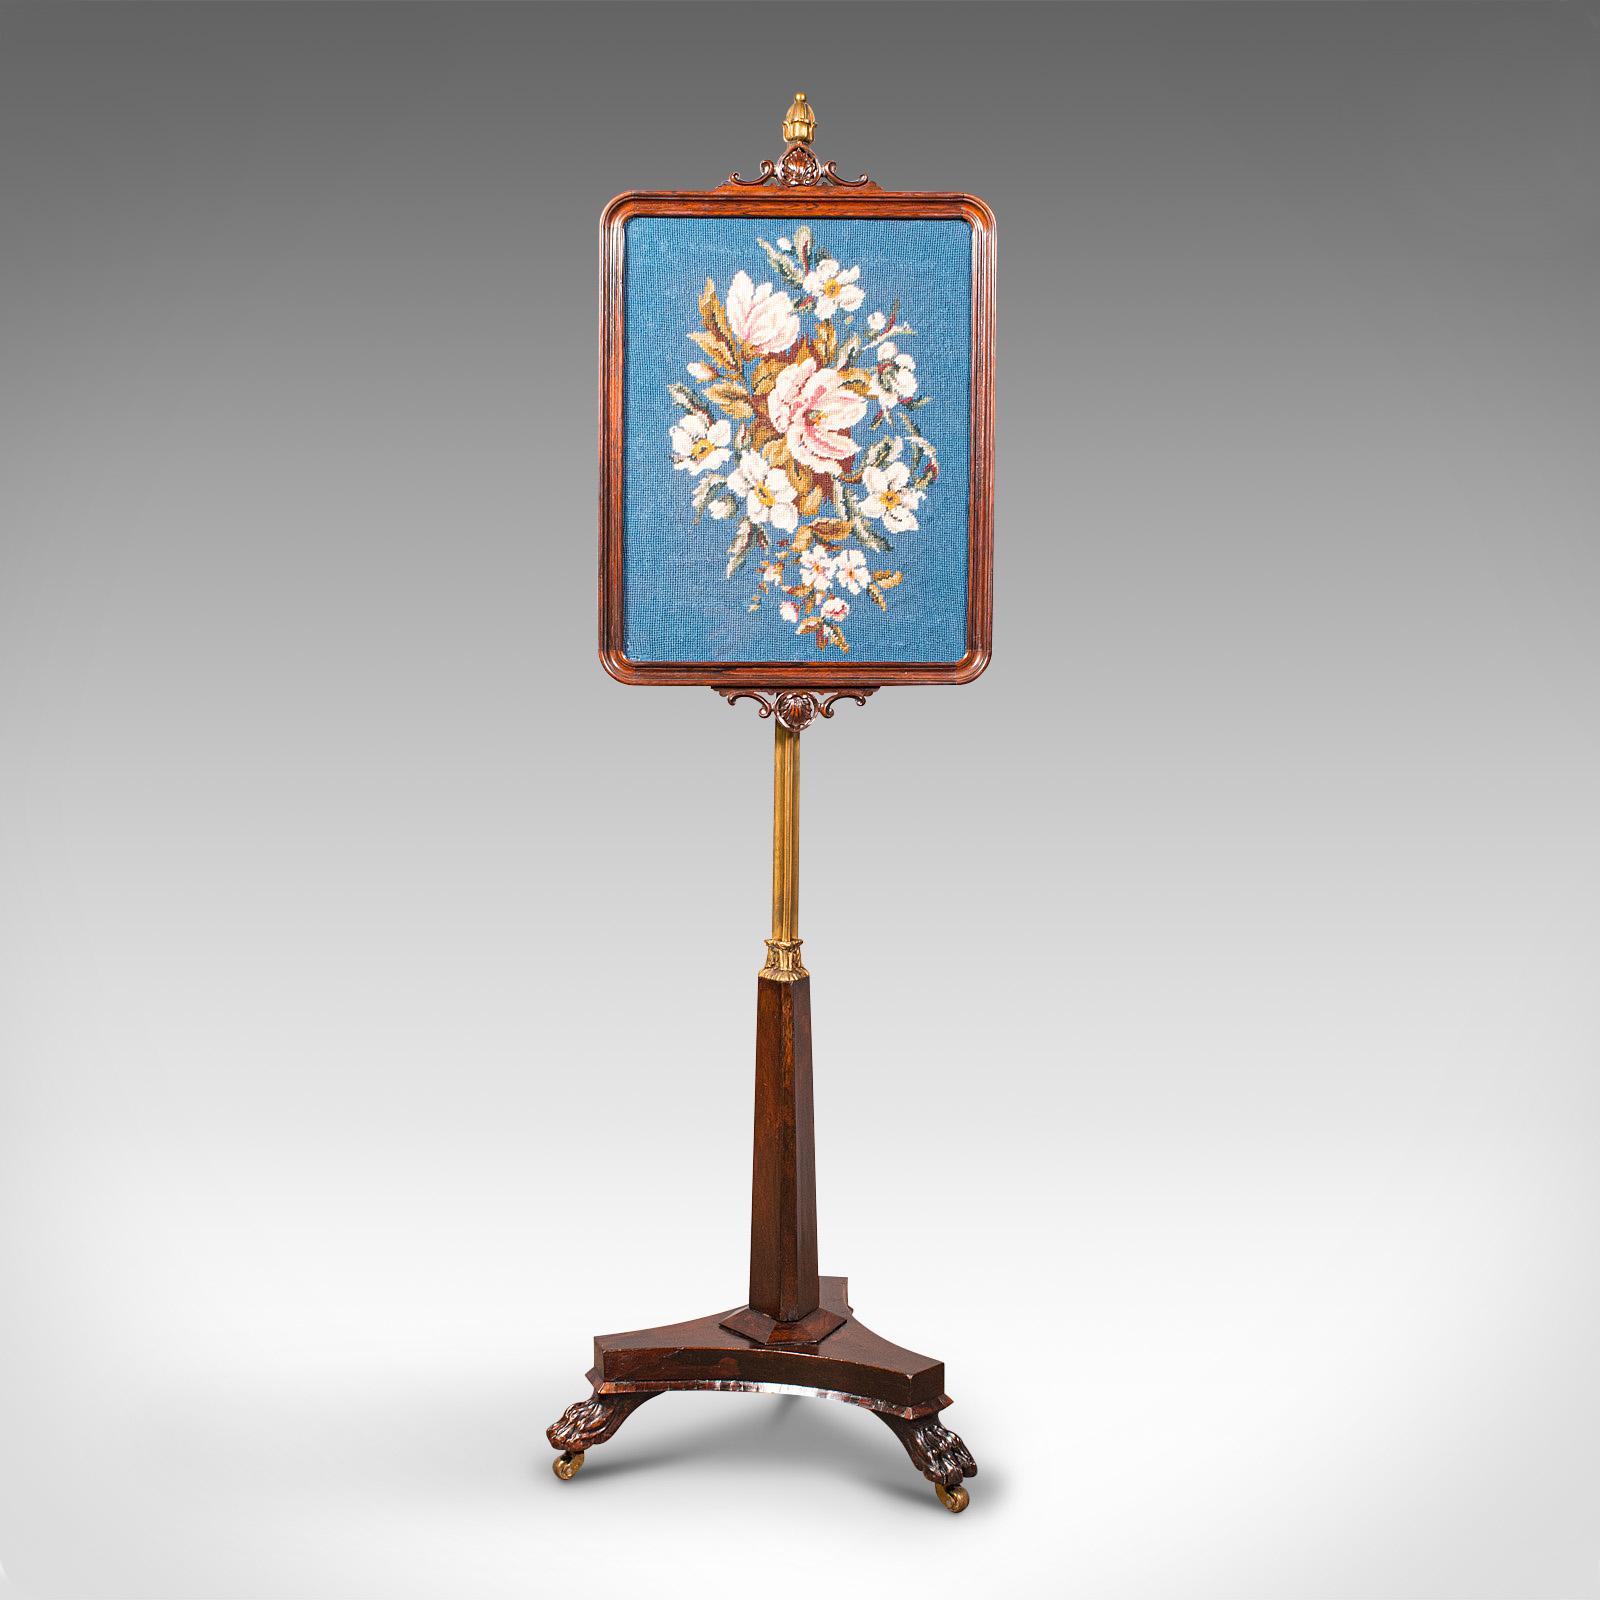 This is an antique fireside pole screen. An English, Rosewood and ormolu adjustable fire screen with needlepoint panel, dating to the William IV period, circa 1830.

Attractive adjustable fireside pole screen
Displays a desirable aged patina and